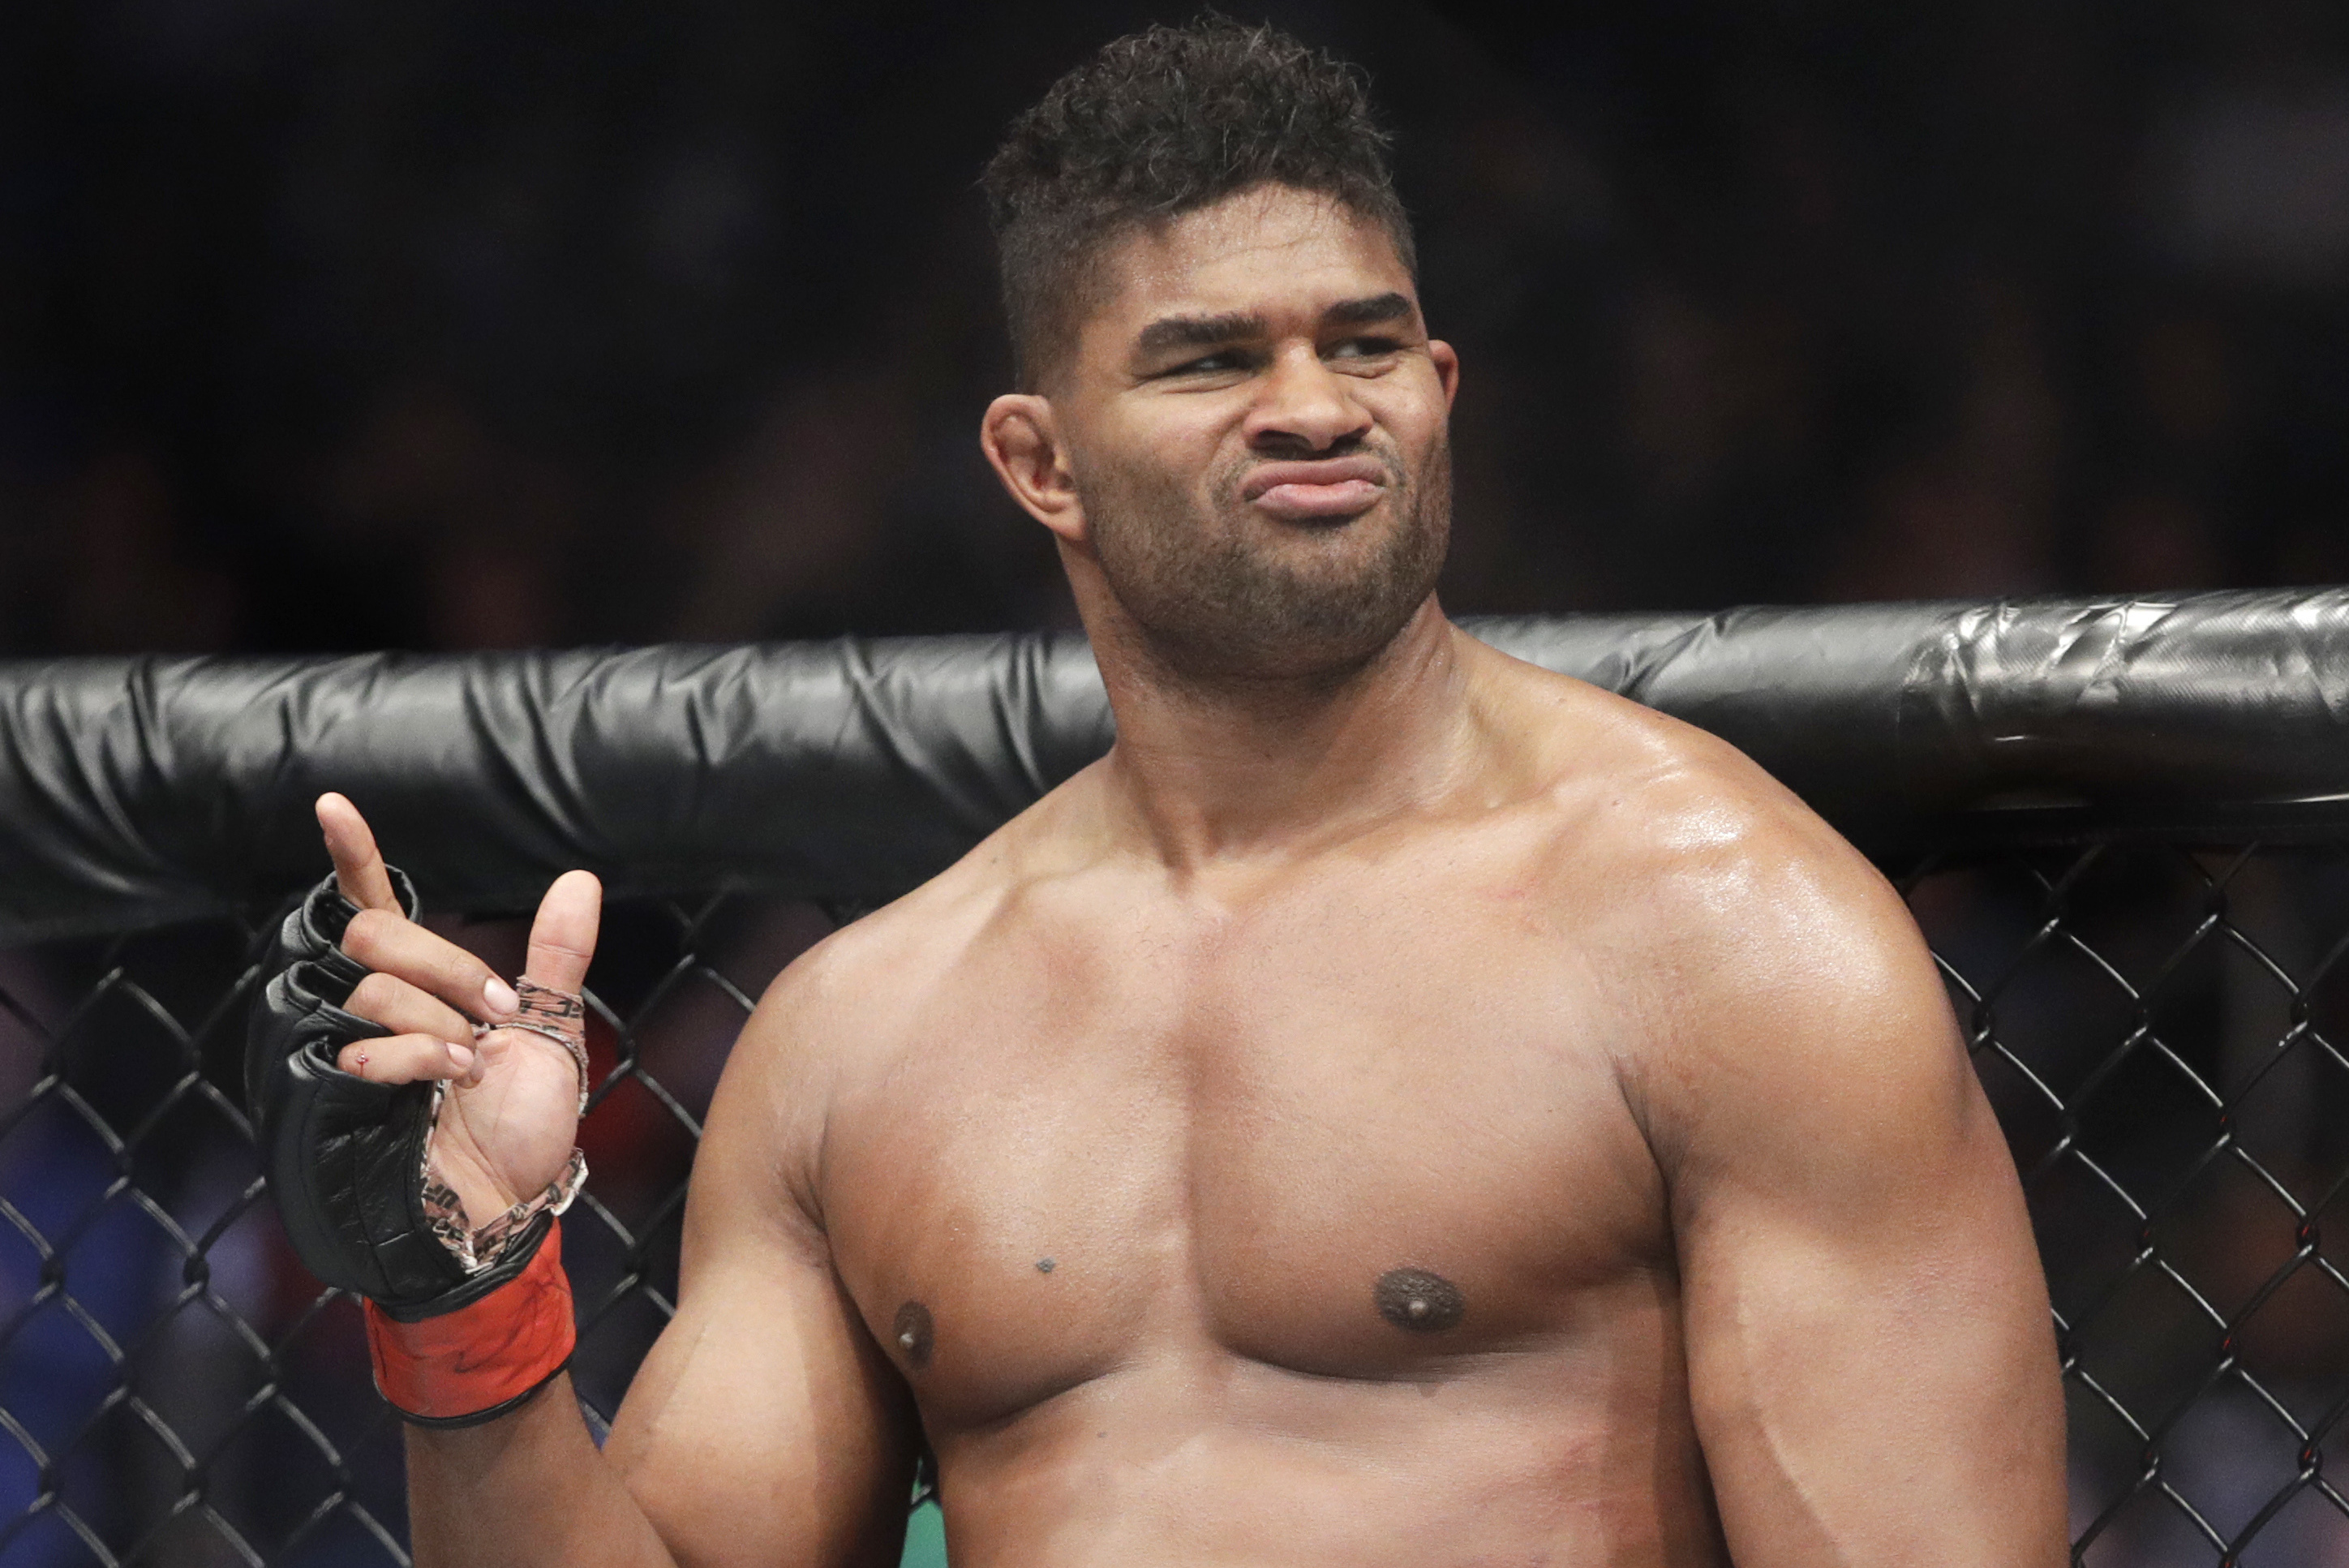 Ufc Fight Night 149 Results Alistair Overeem Tkos Alexey Oleynik In 1st Round Bleacher Report Latest News Videos And Highlights